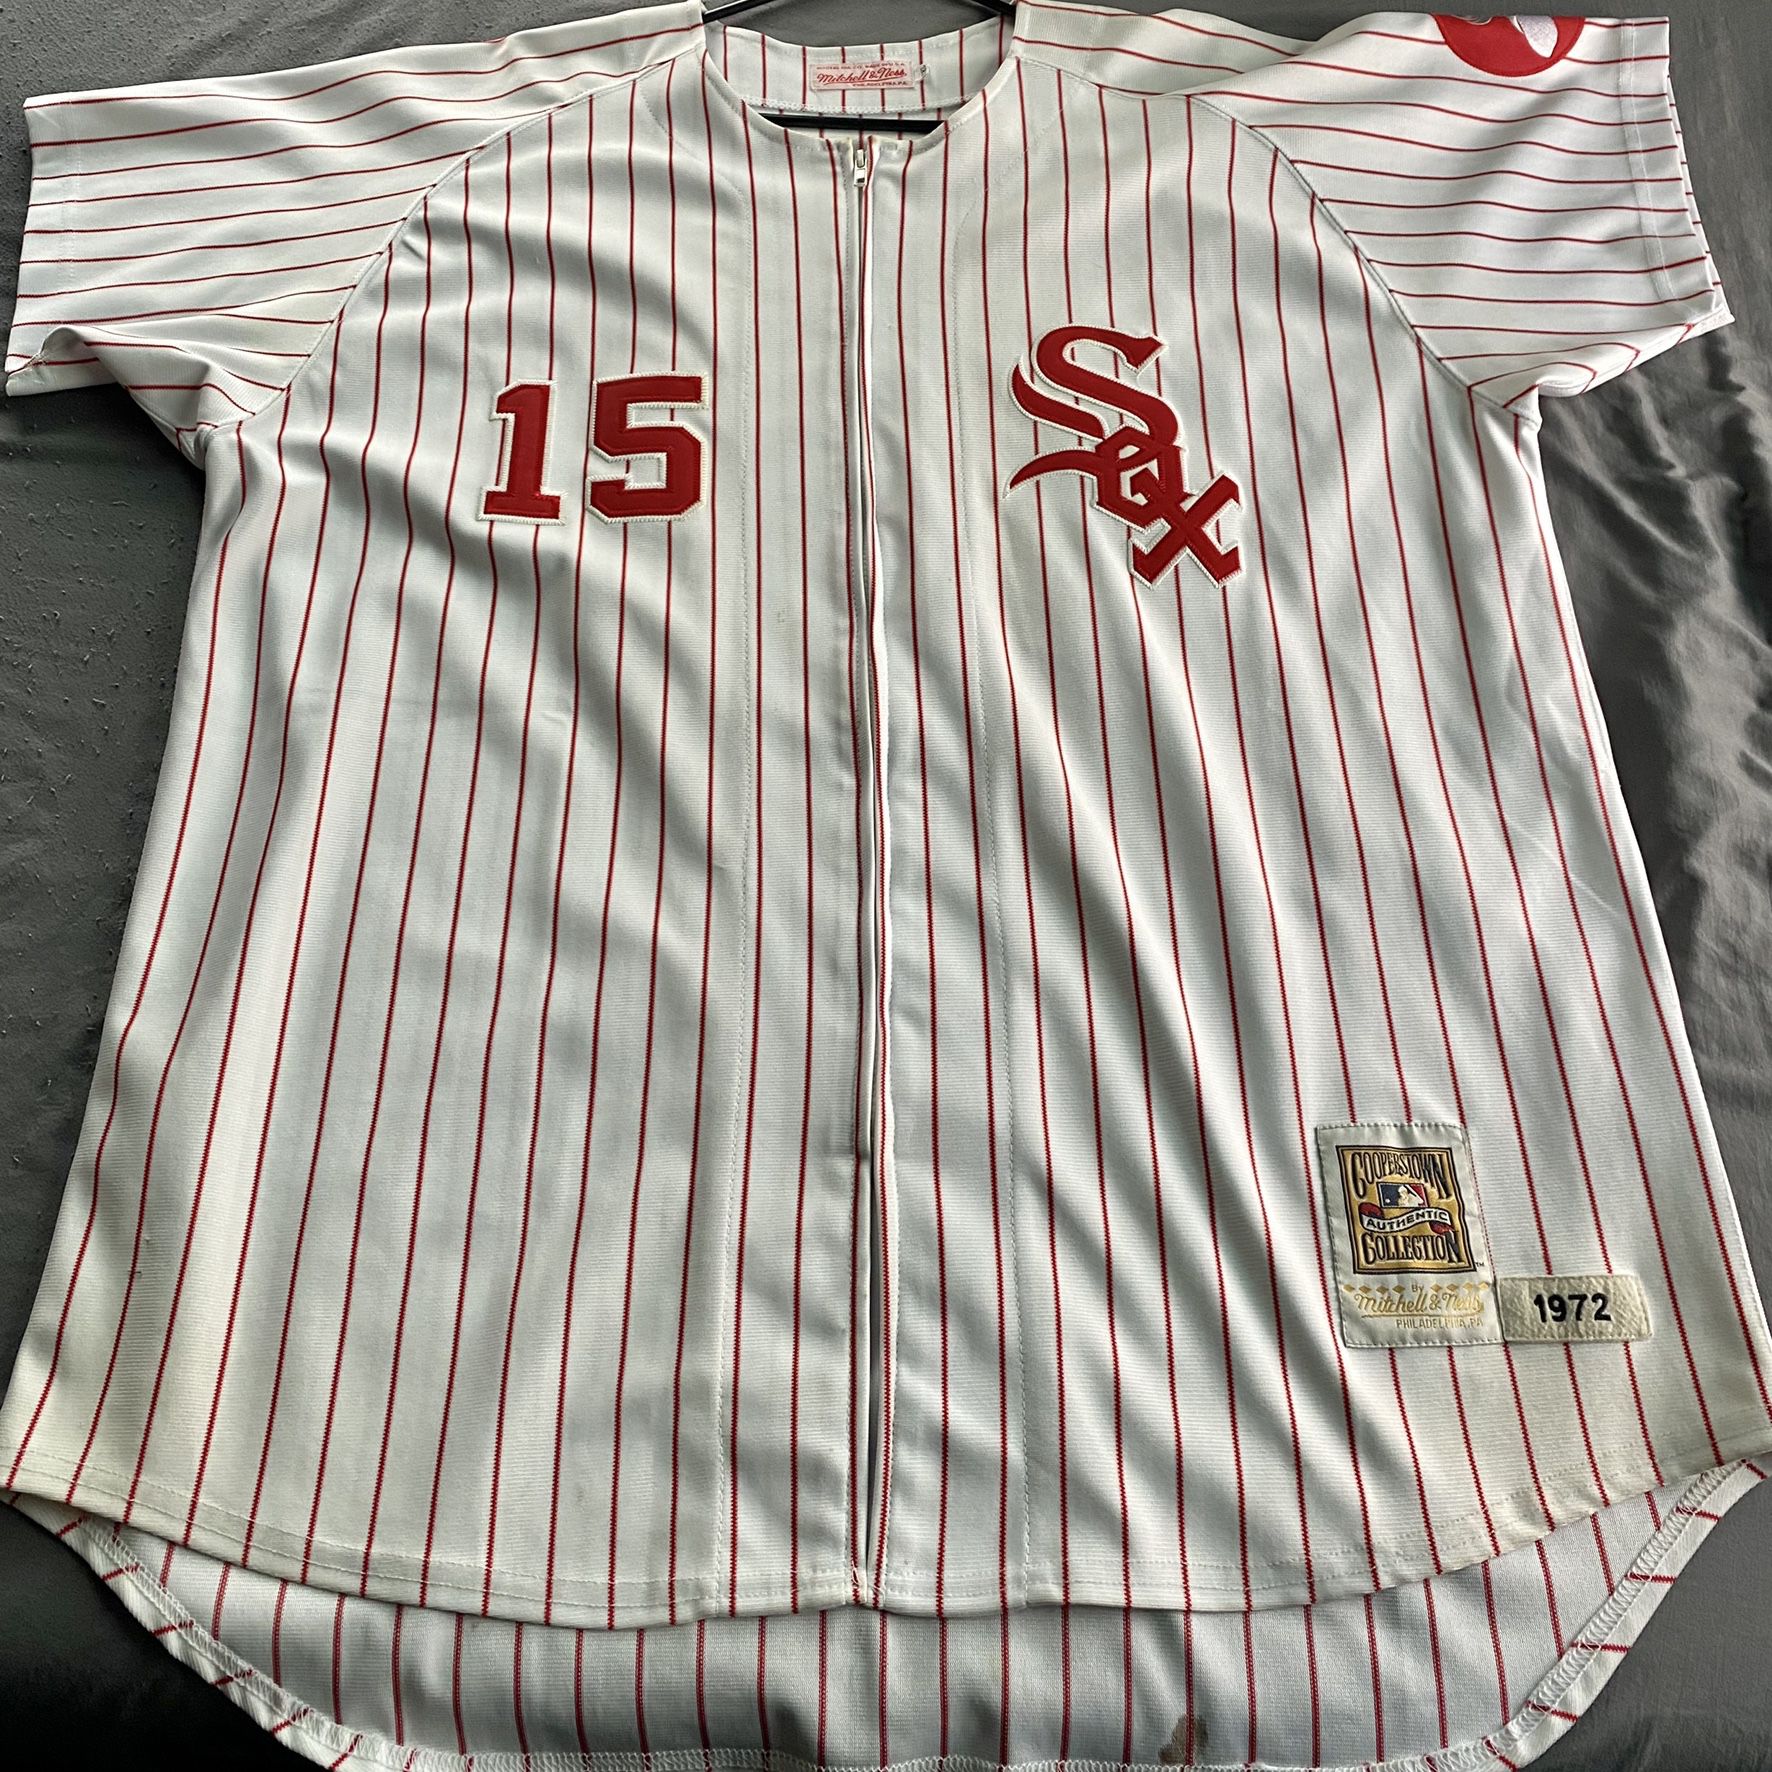 red and white white sox jersey